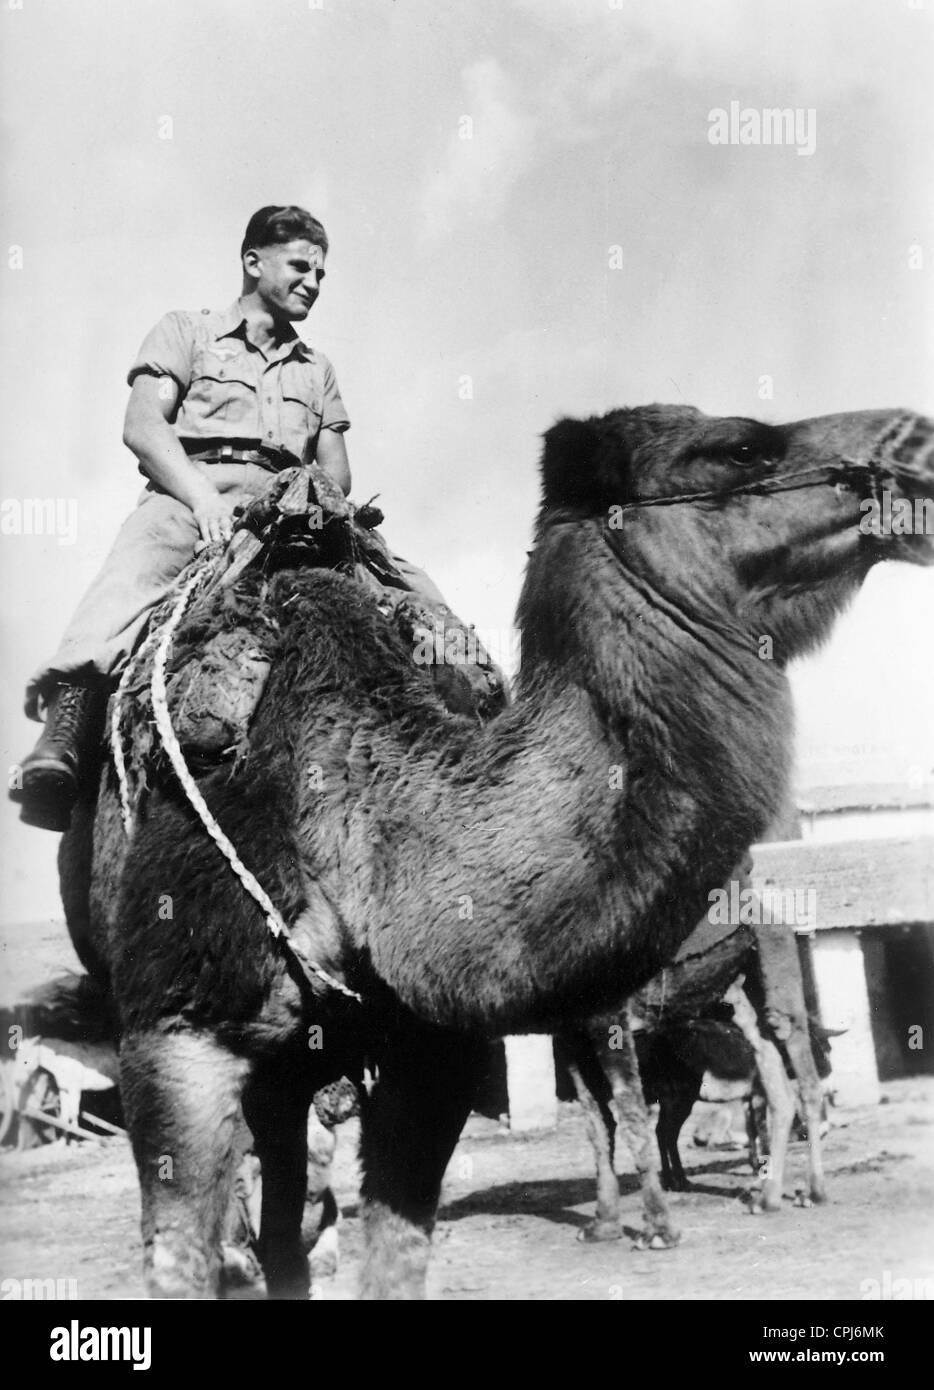 German soldier on a camel, 1942 Stock Photo